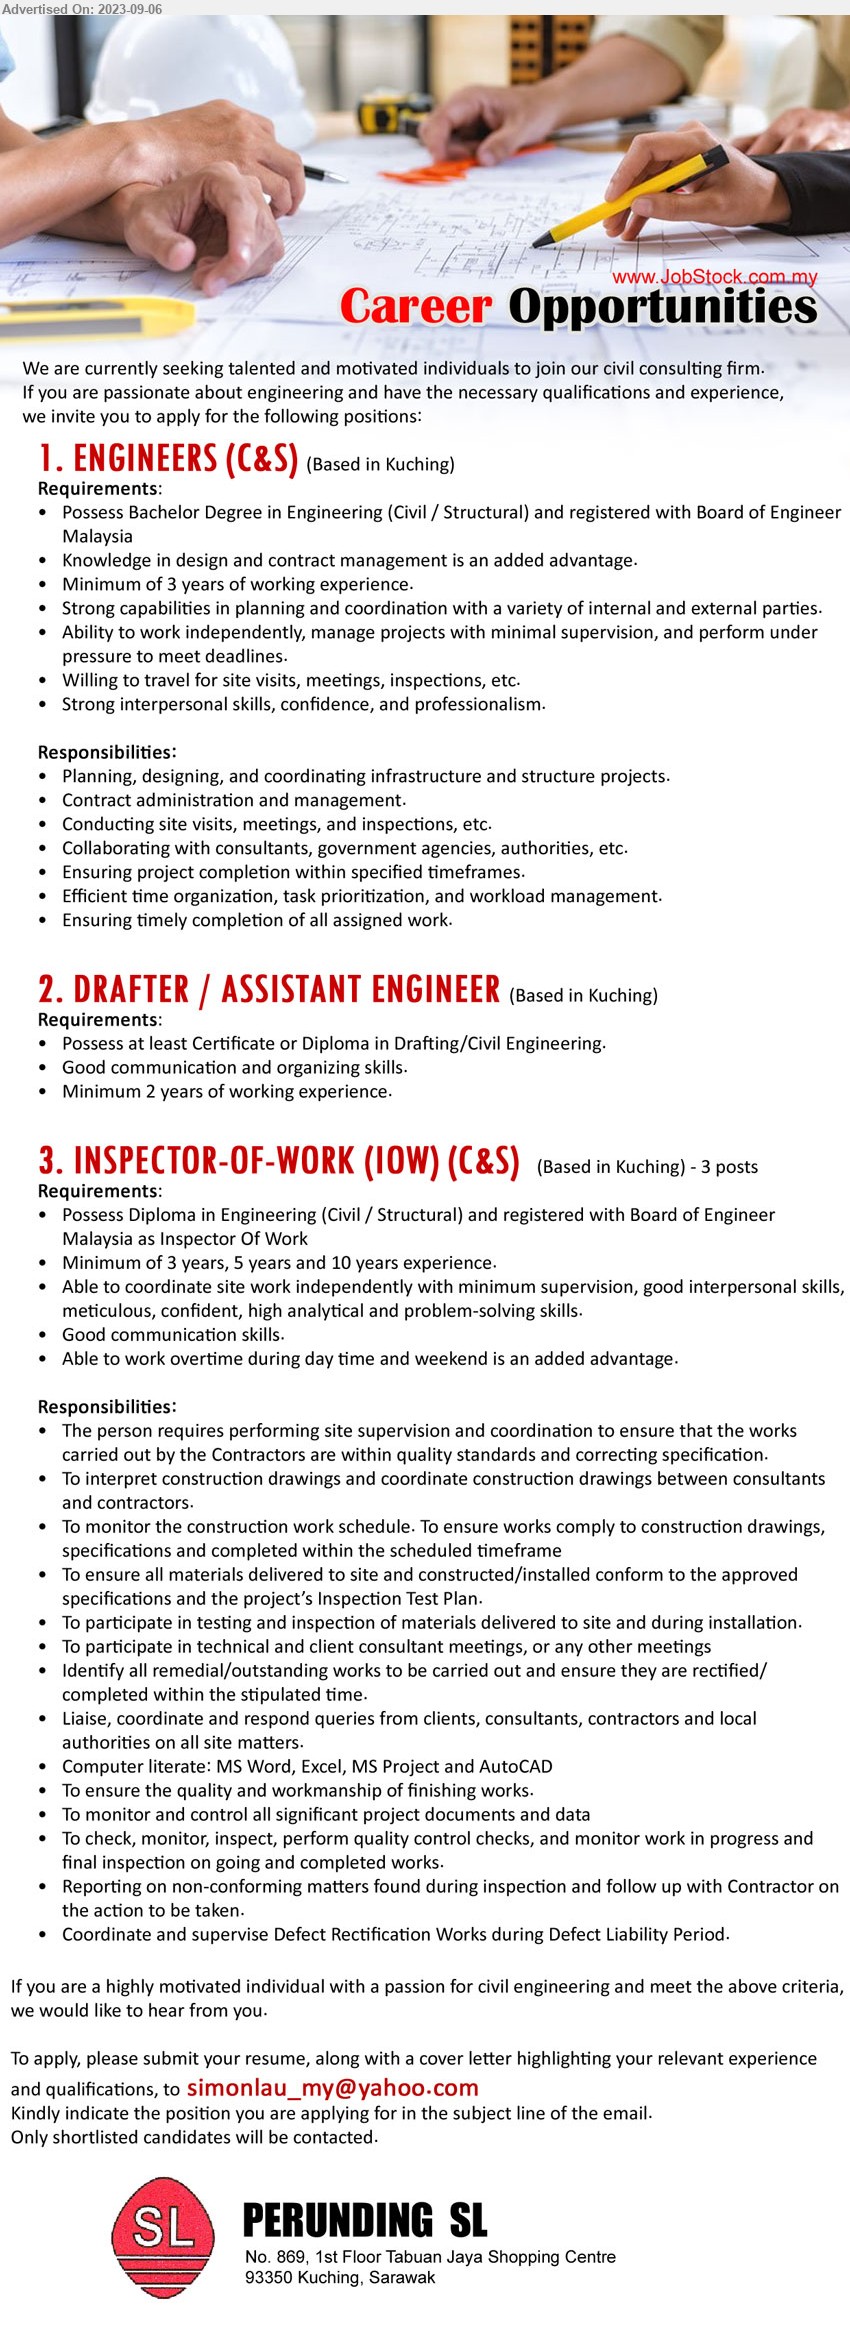 PERUNDING SL - 1. ENGINEERS (C&S) (Kuching), Bachelor Degree in Engineering (Civil / Structural) and registered with Board of Engineer Malaysia,...
2. DRAFTER / ASSISTANT ENGINEER (Kuching), Certificate or Diploma in Drafting/Civil Engineering,...
3. INSPECTOR-OF-WORK (IOW) (C&S)  (Kuching), Diploma in Engineering (Civil / Structural) and registered with Board of Engineer Malaysia as Inspector Of Work,...
Email resume to ...
